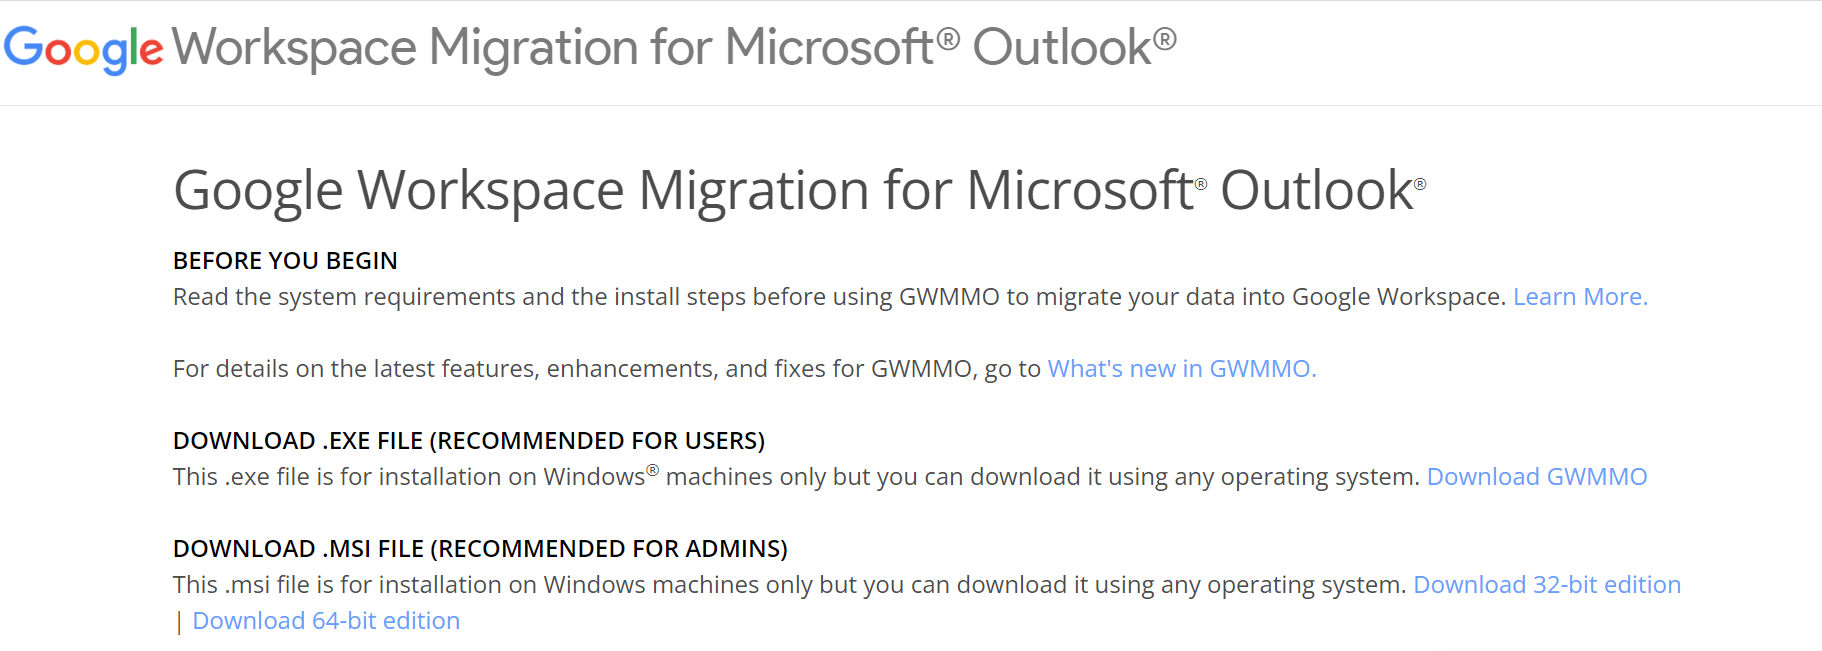 Google Workspace Migration for Microsoft Outlook: select account